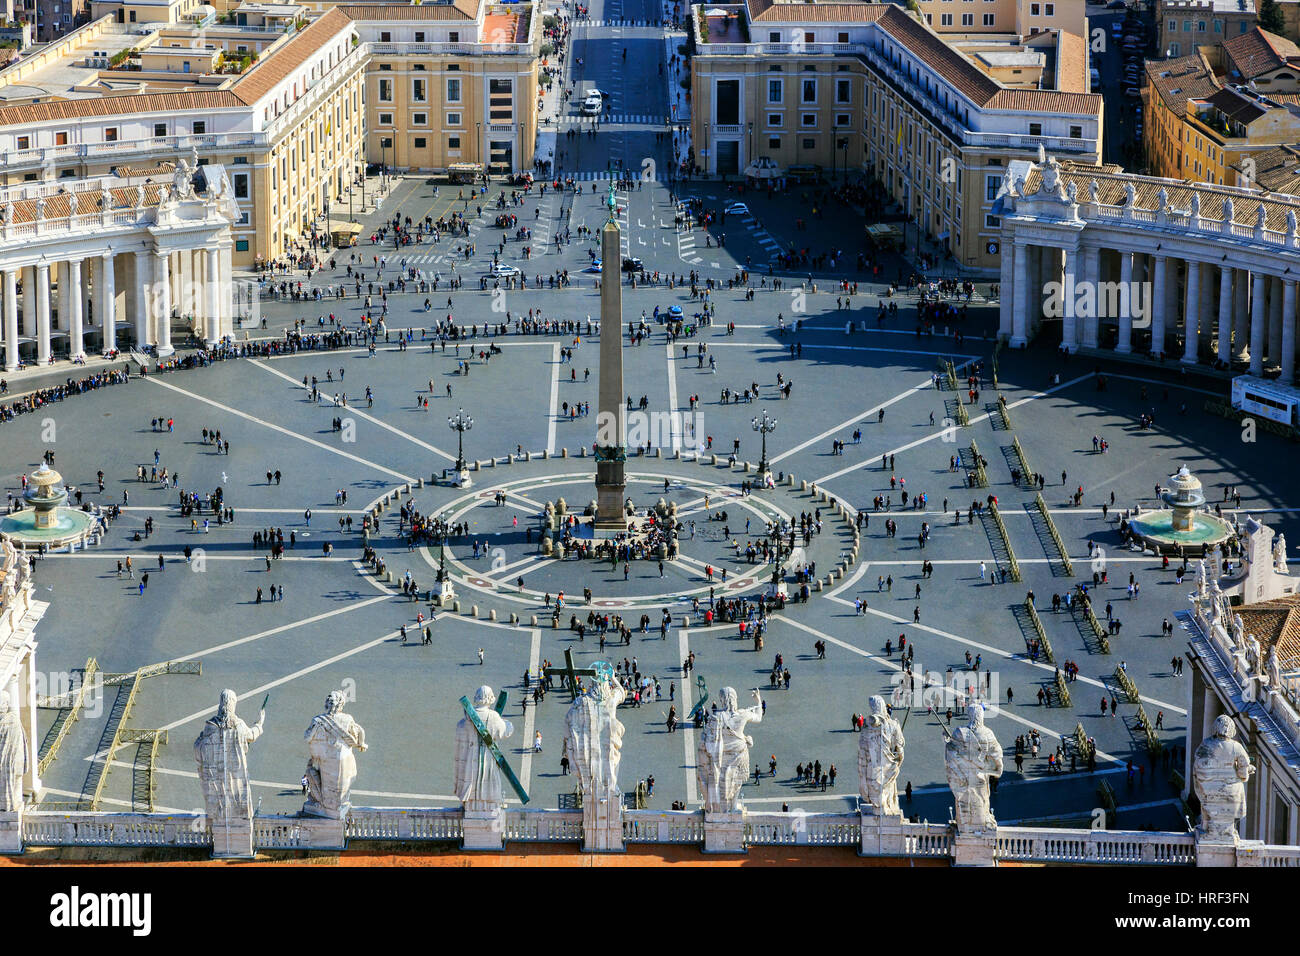 High View over St Peters square, Piazza di San Pietro, Vatican City, Rome, Italy Stock Photo